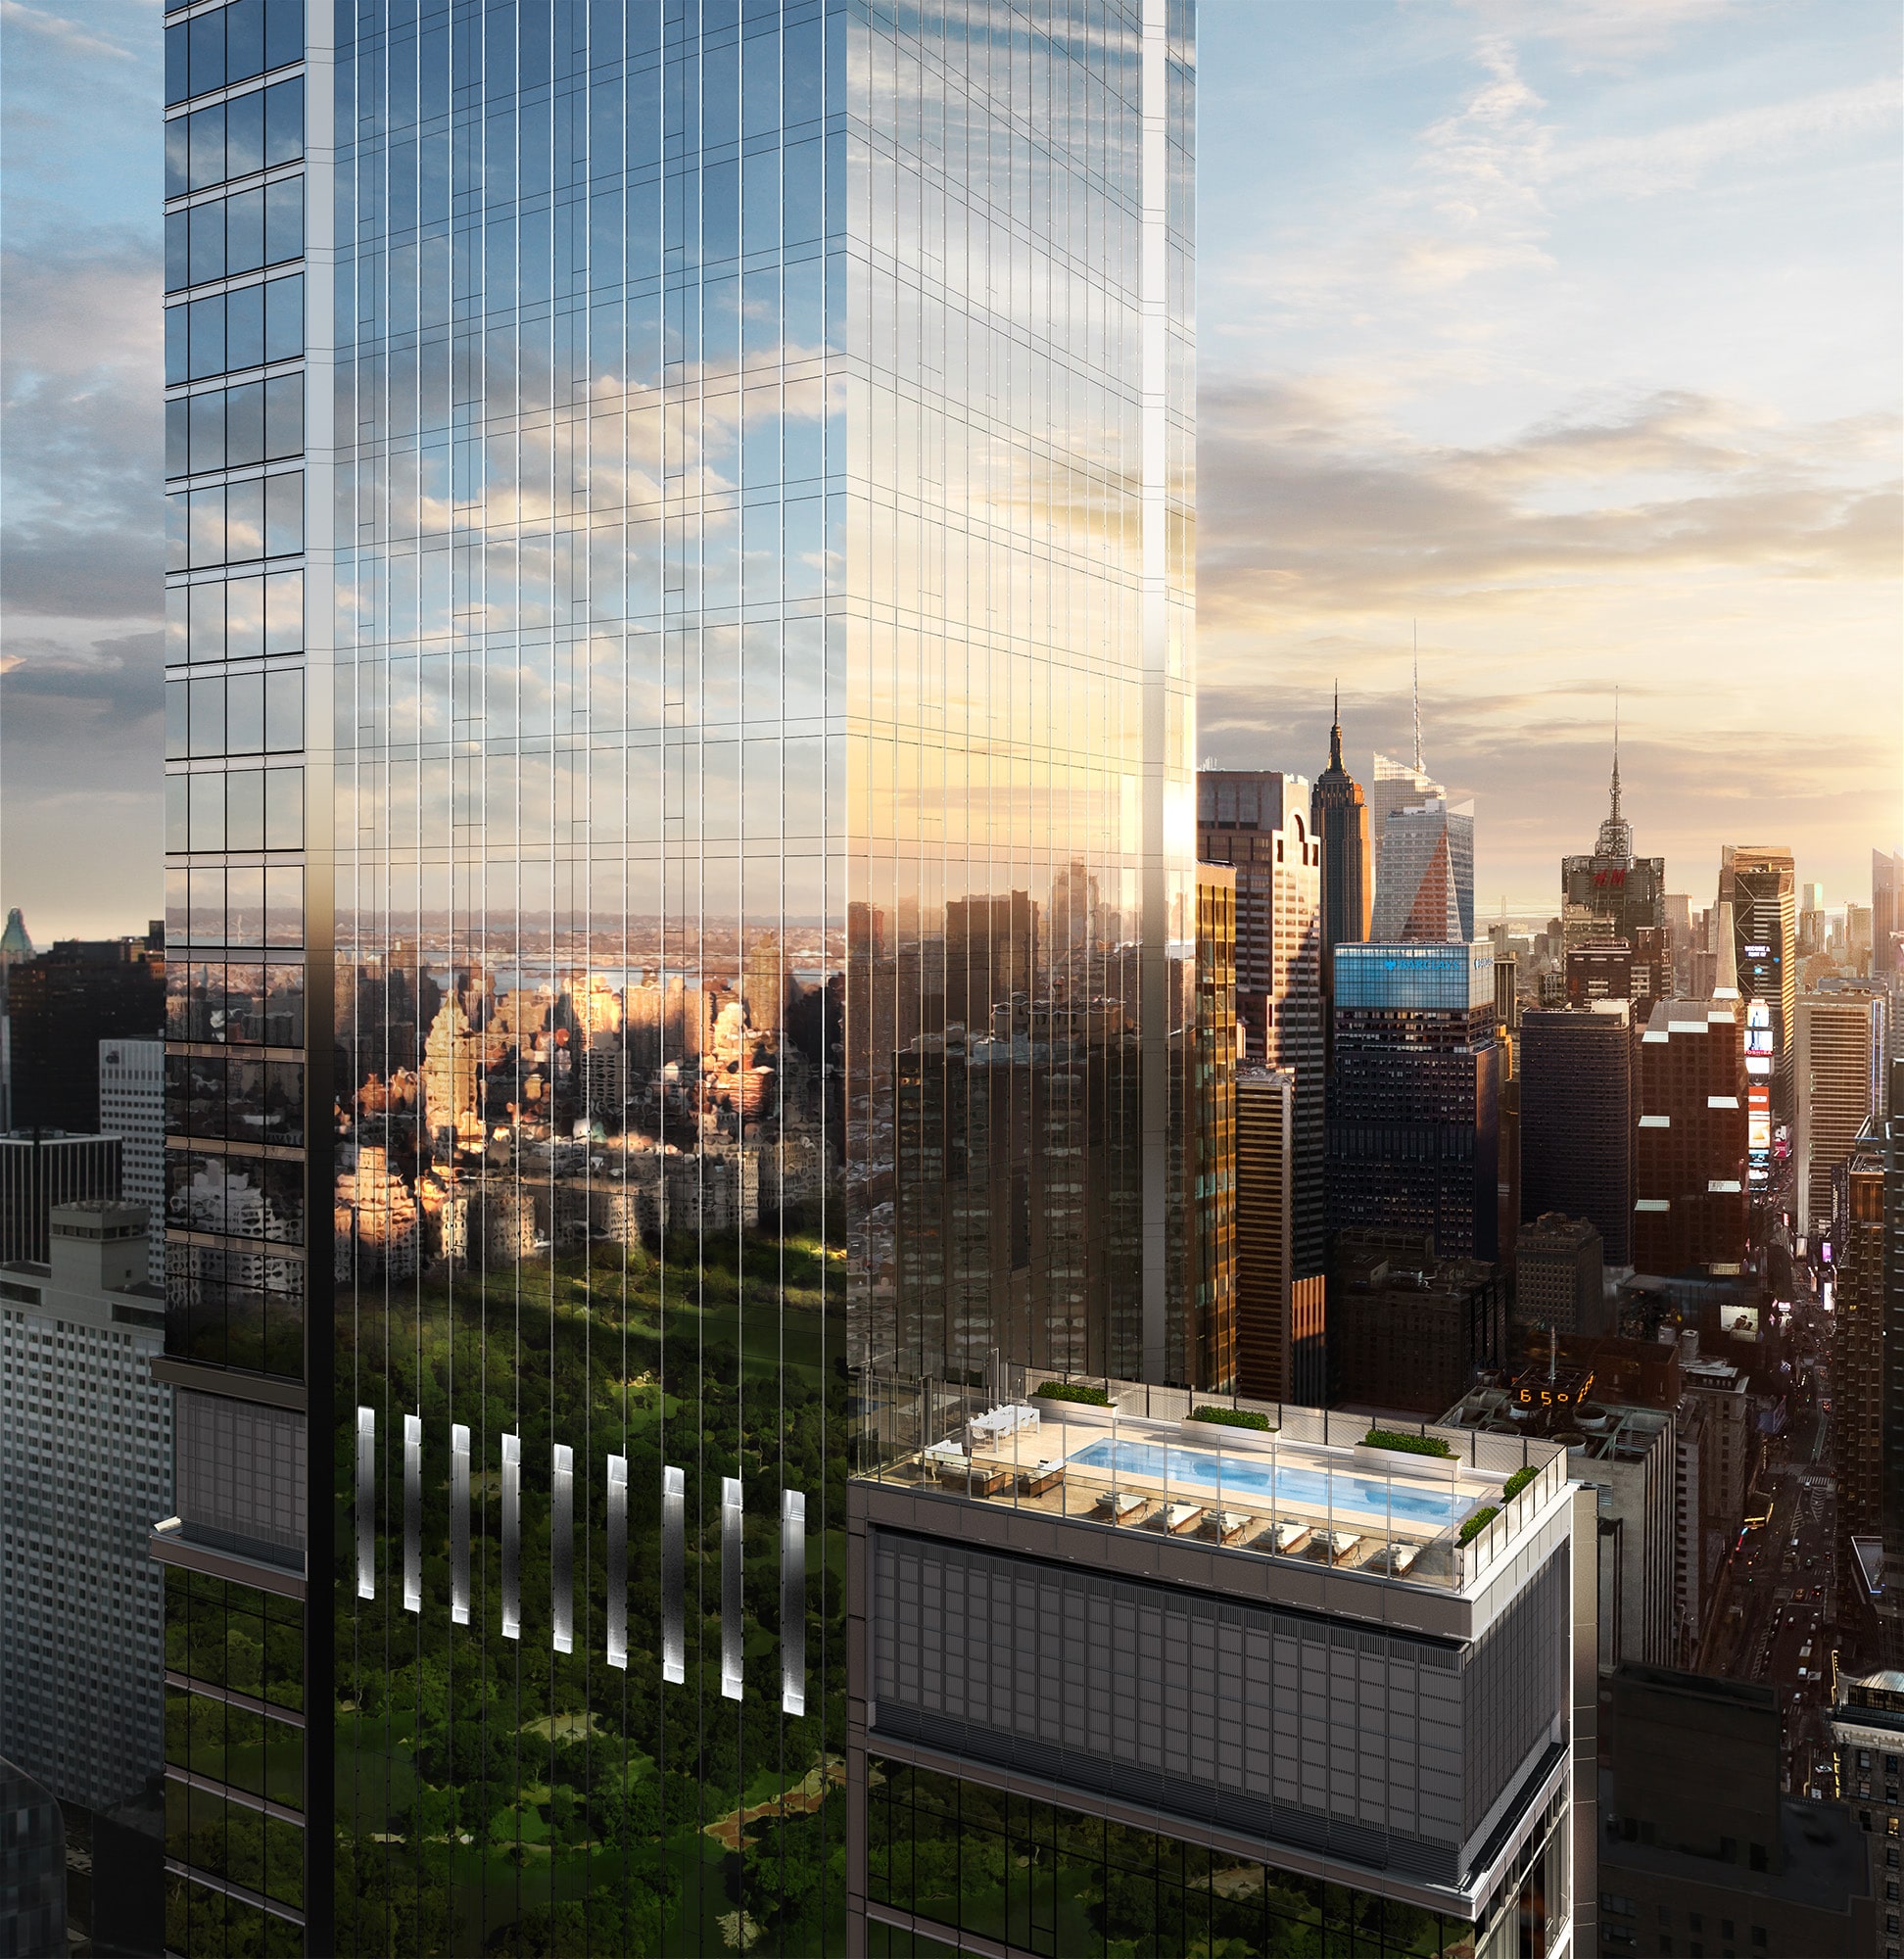 Upper view of Central Park Tower luxury condominiums and pool in NYC. Background of skyline and high rises in New York.